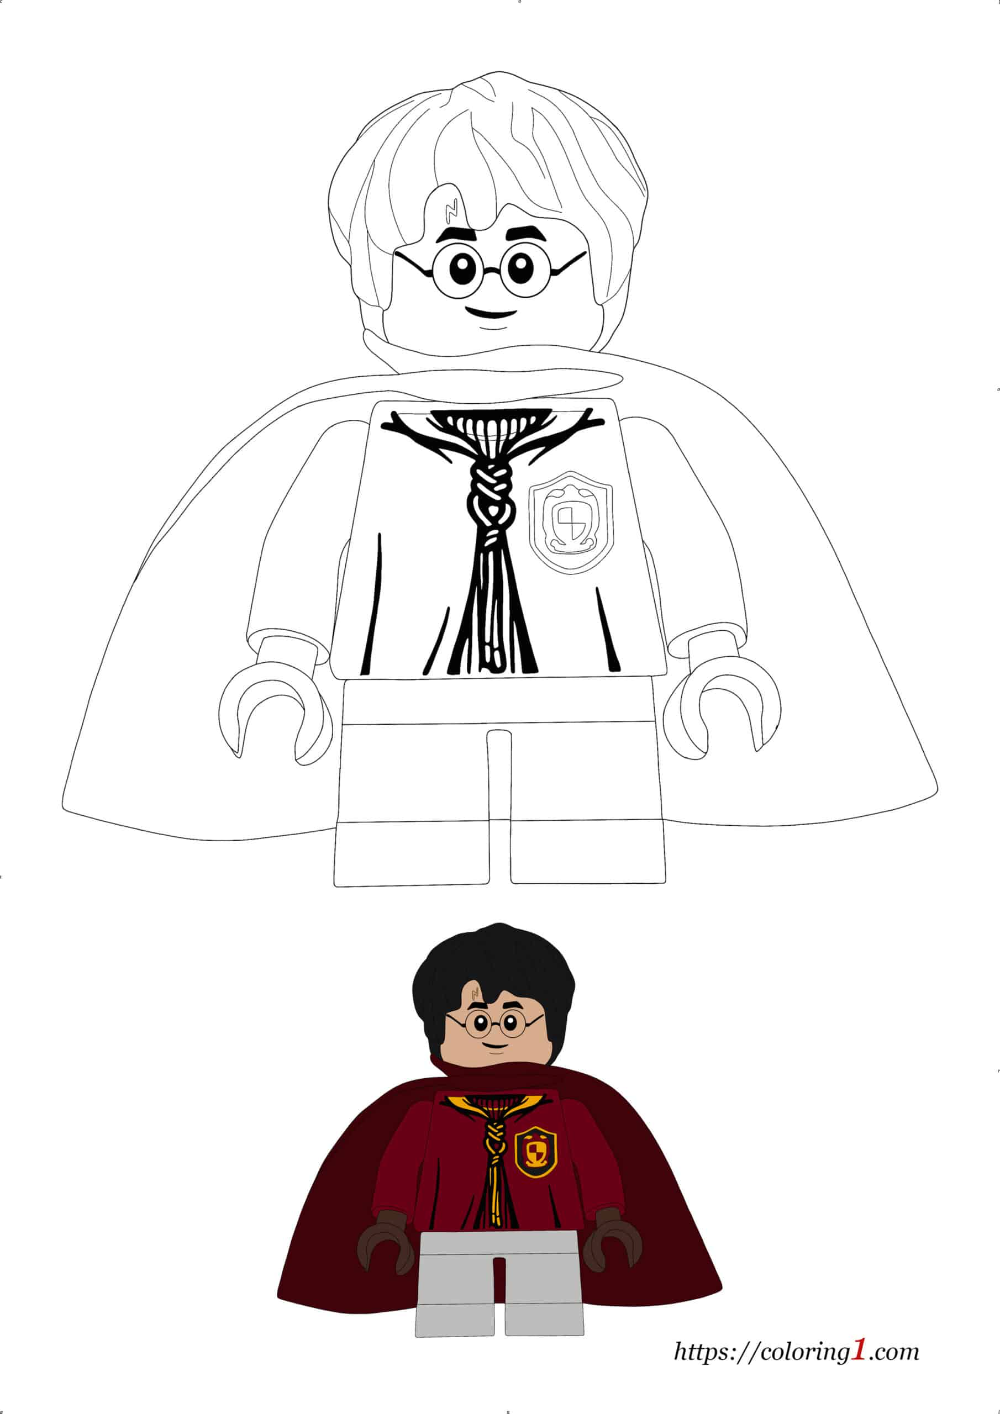 Lego harry potter coloring pages